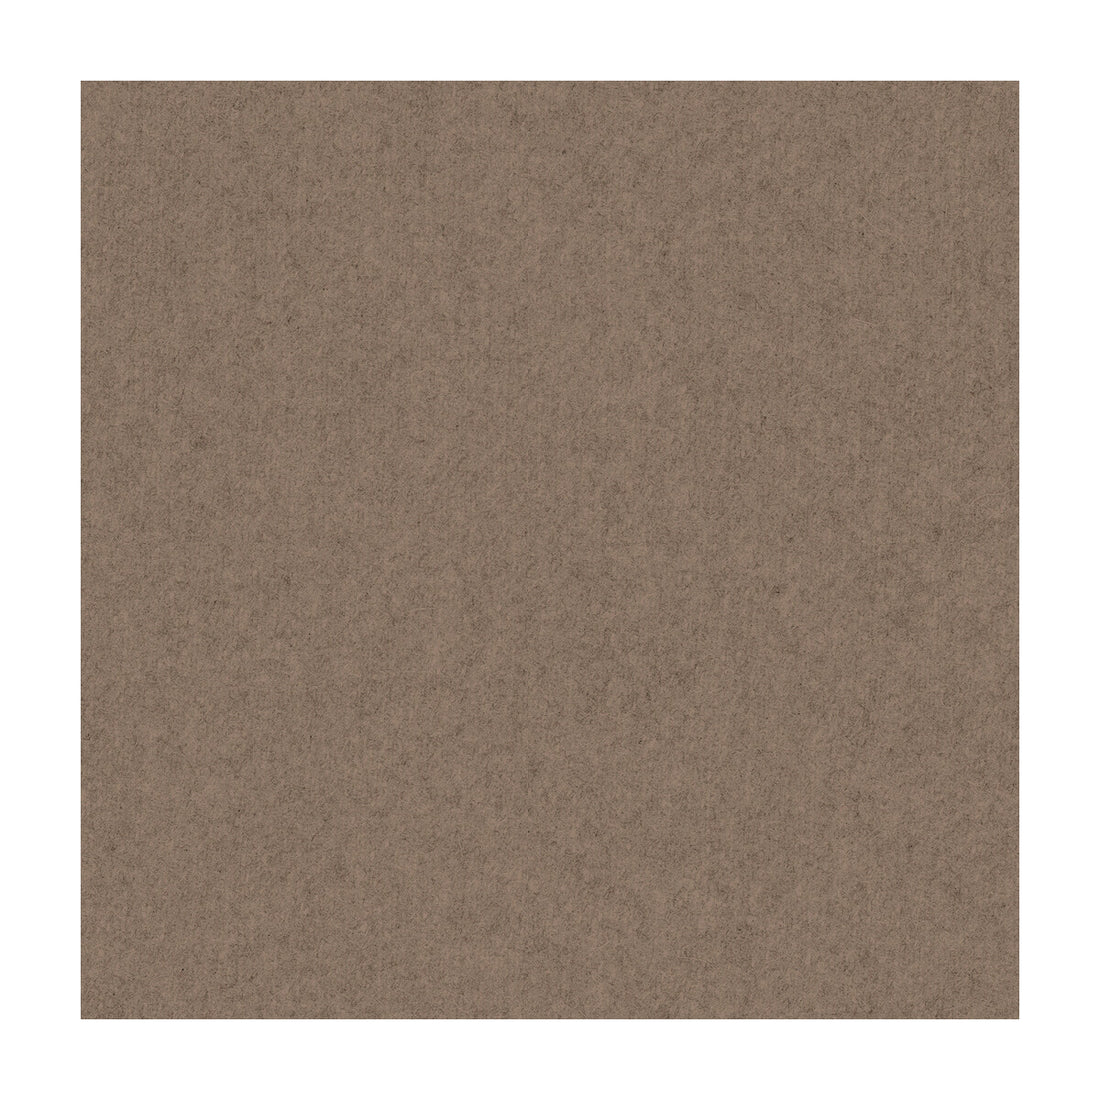 Jefferson Wool fabric in acorn color - pattern 34397.616.0 - by Kravet Contract